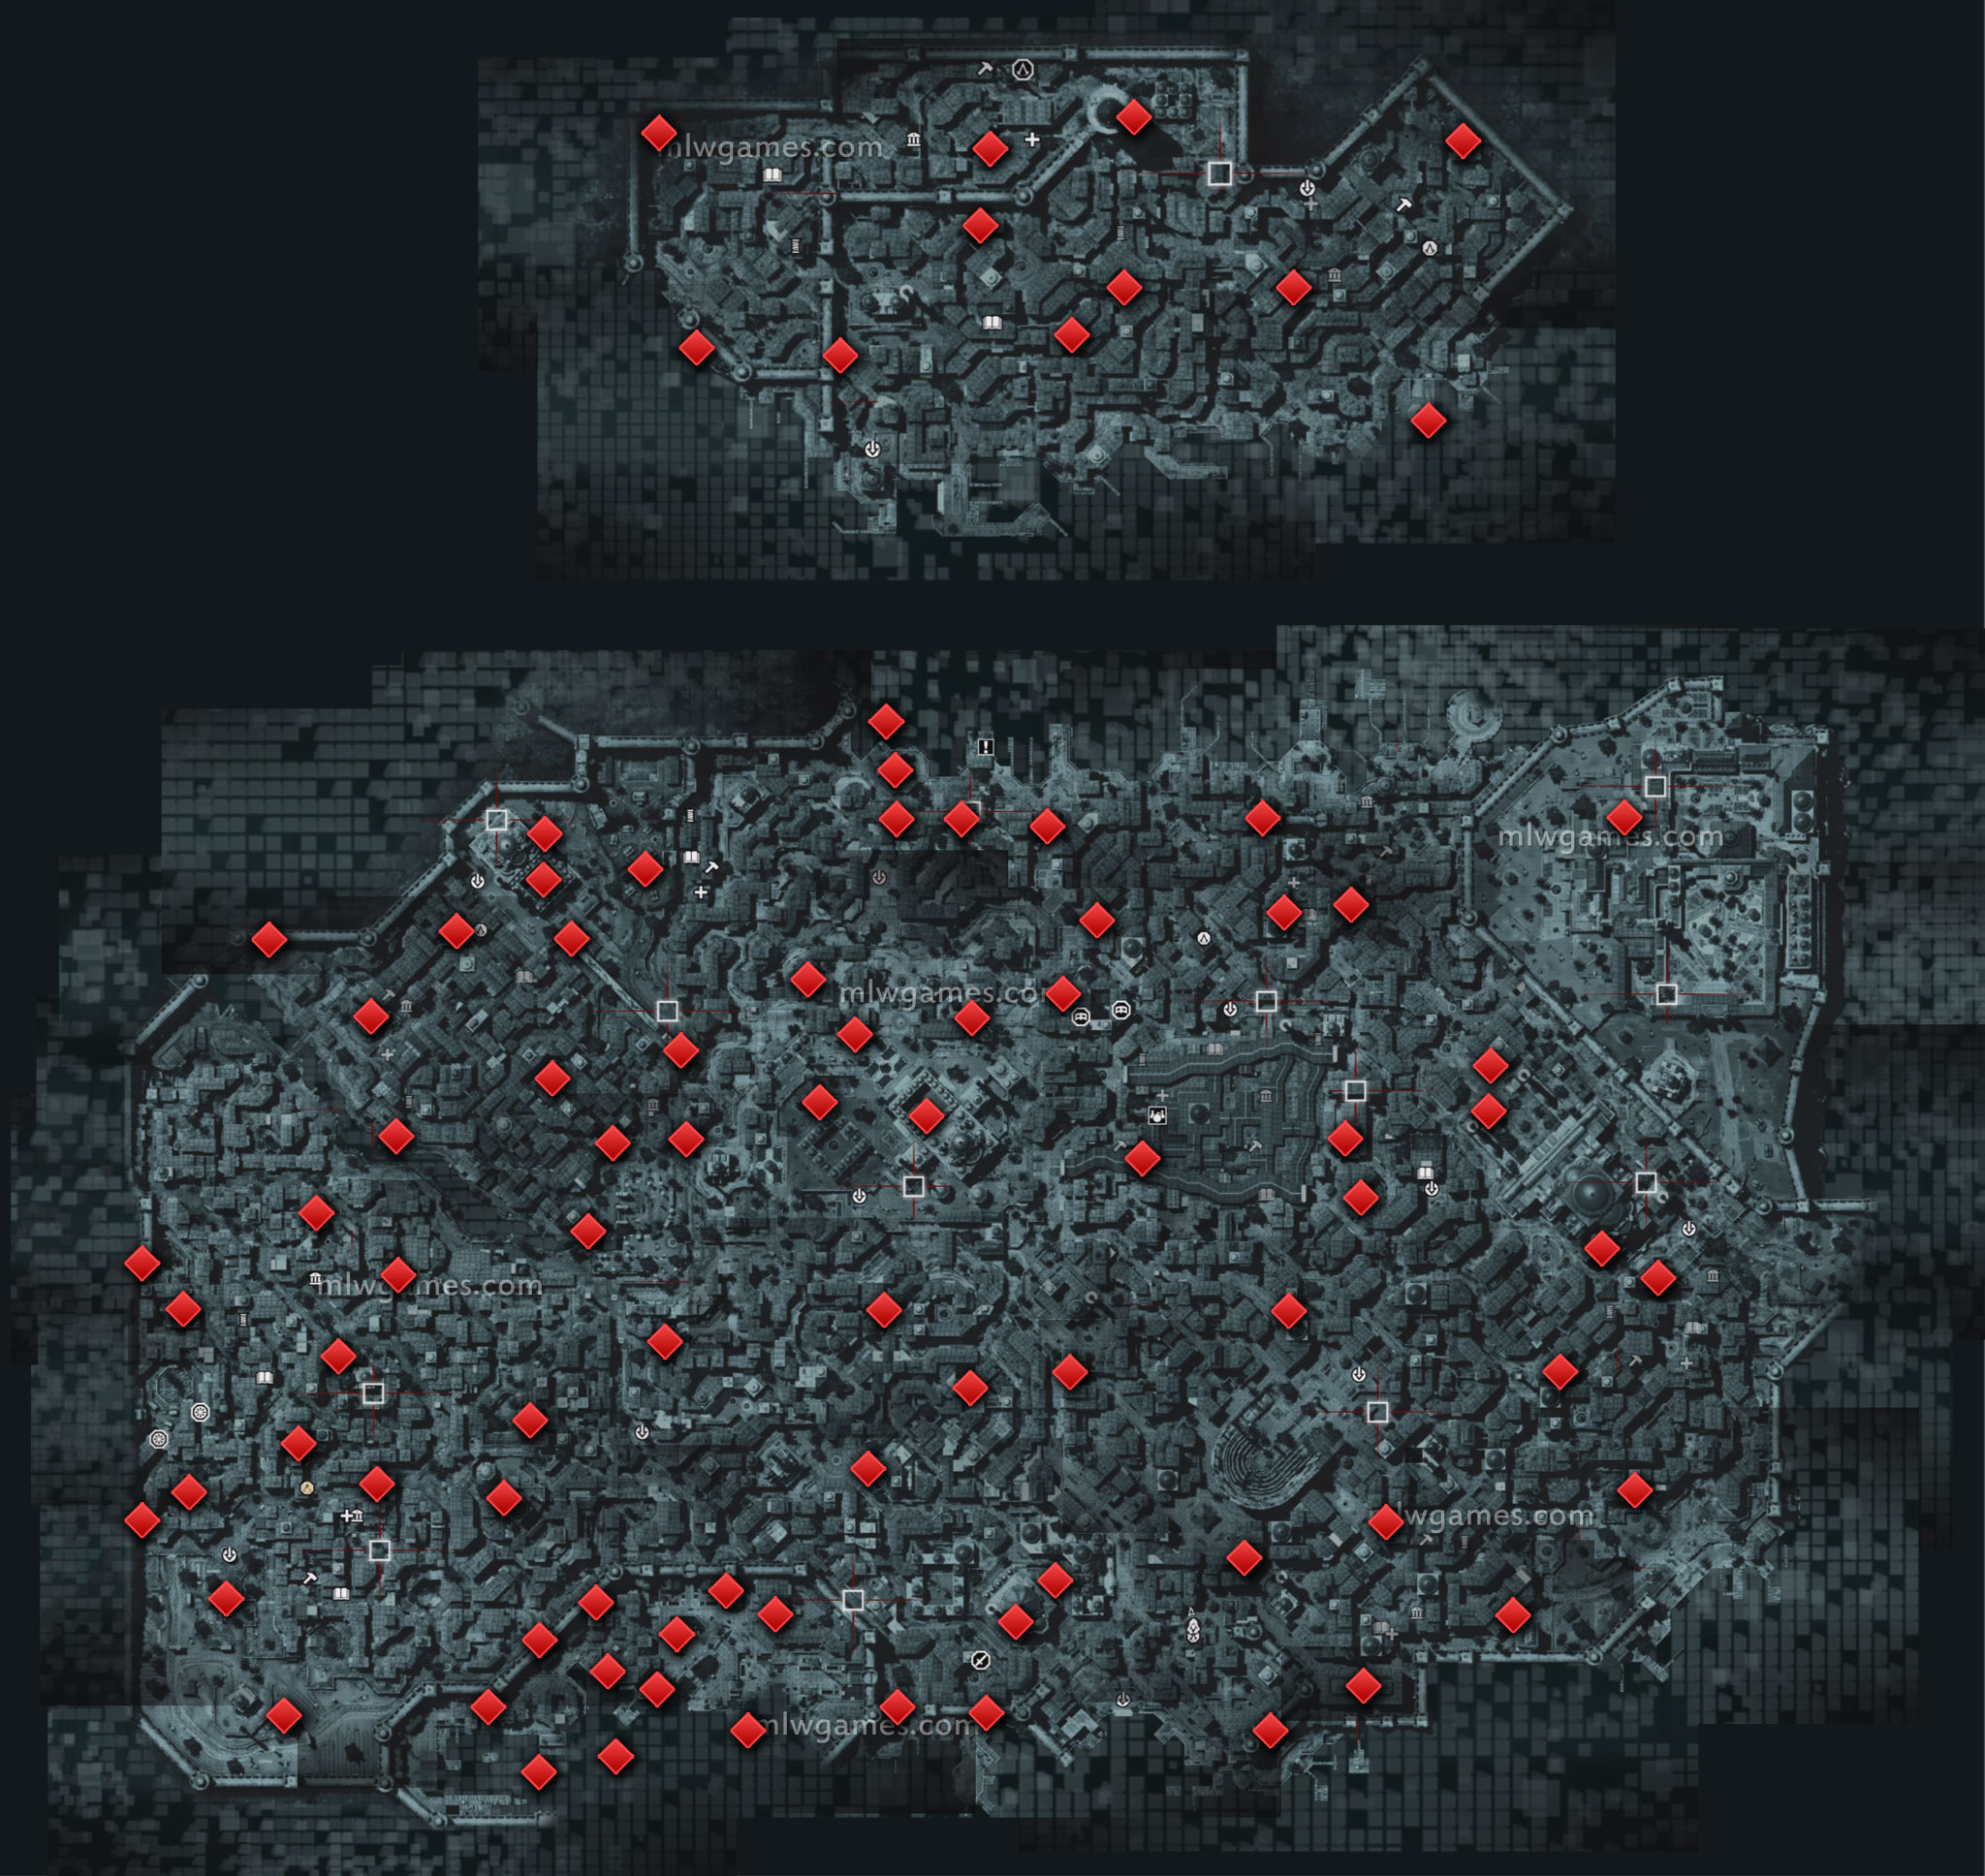 Interactive Map for AC Revelations (includes data fragments